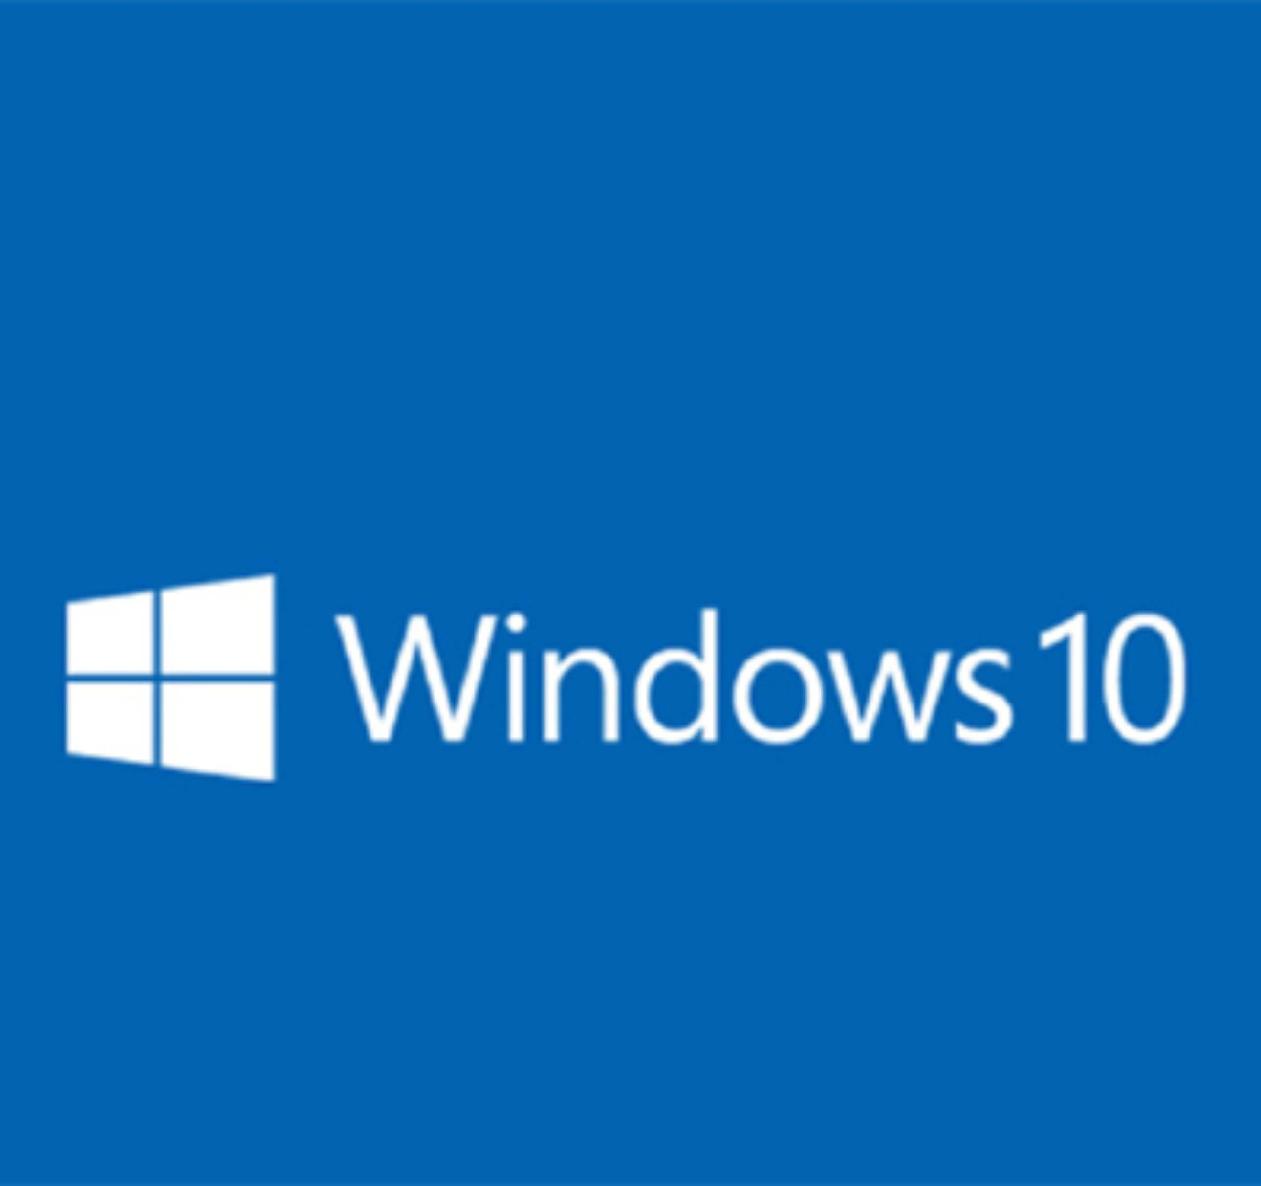 The most prominent change in Windows 10 is that Microsoft supplanted the Start - photo 3